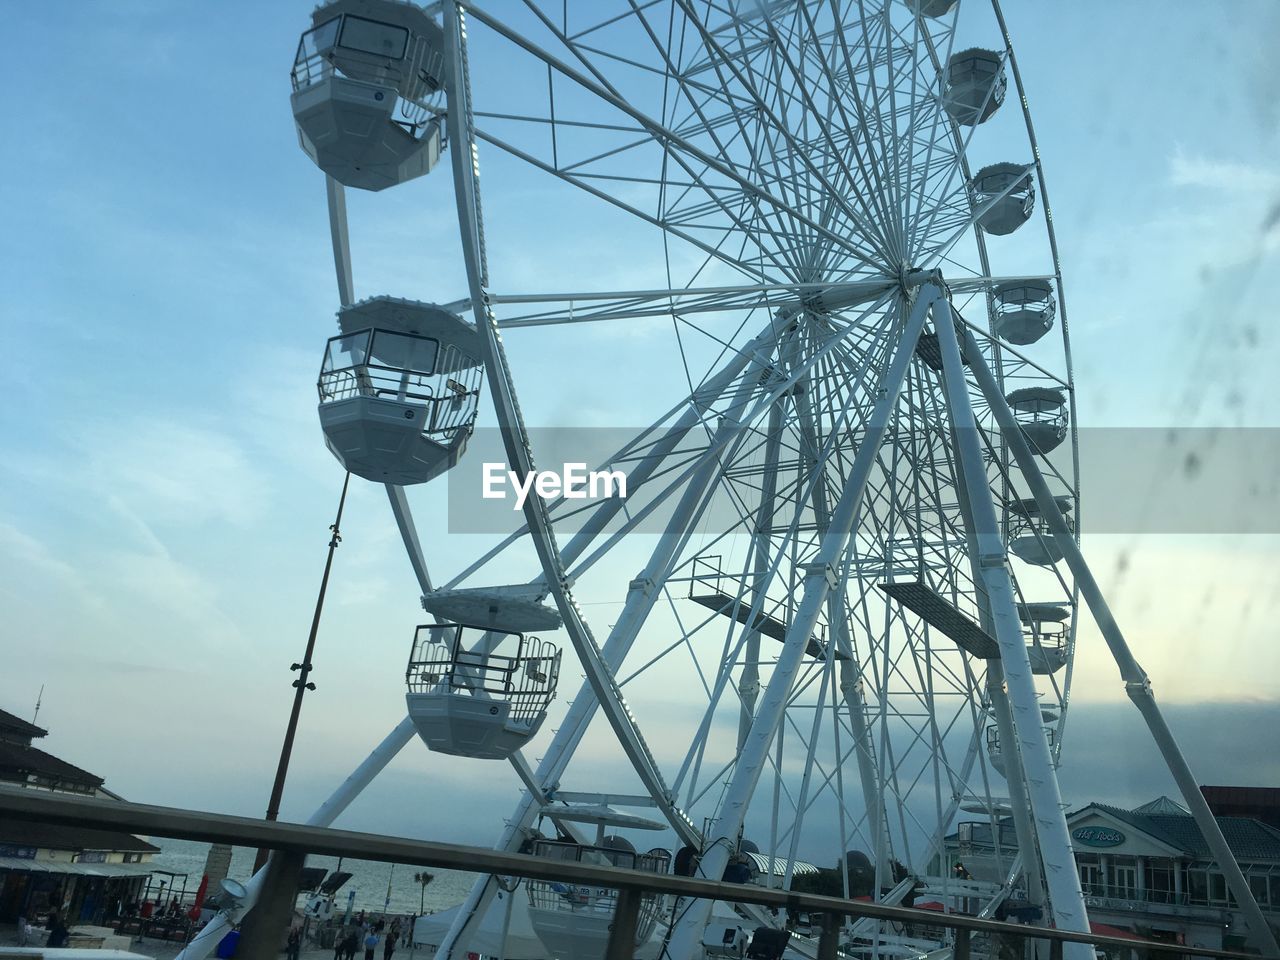 LOW ANGLE VIEW OF FERRIS WHEEL IN CITY